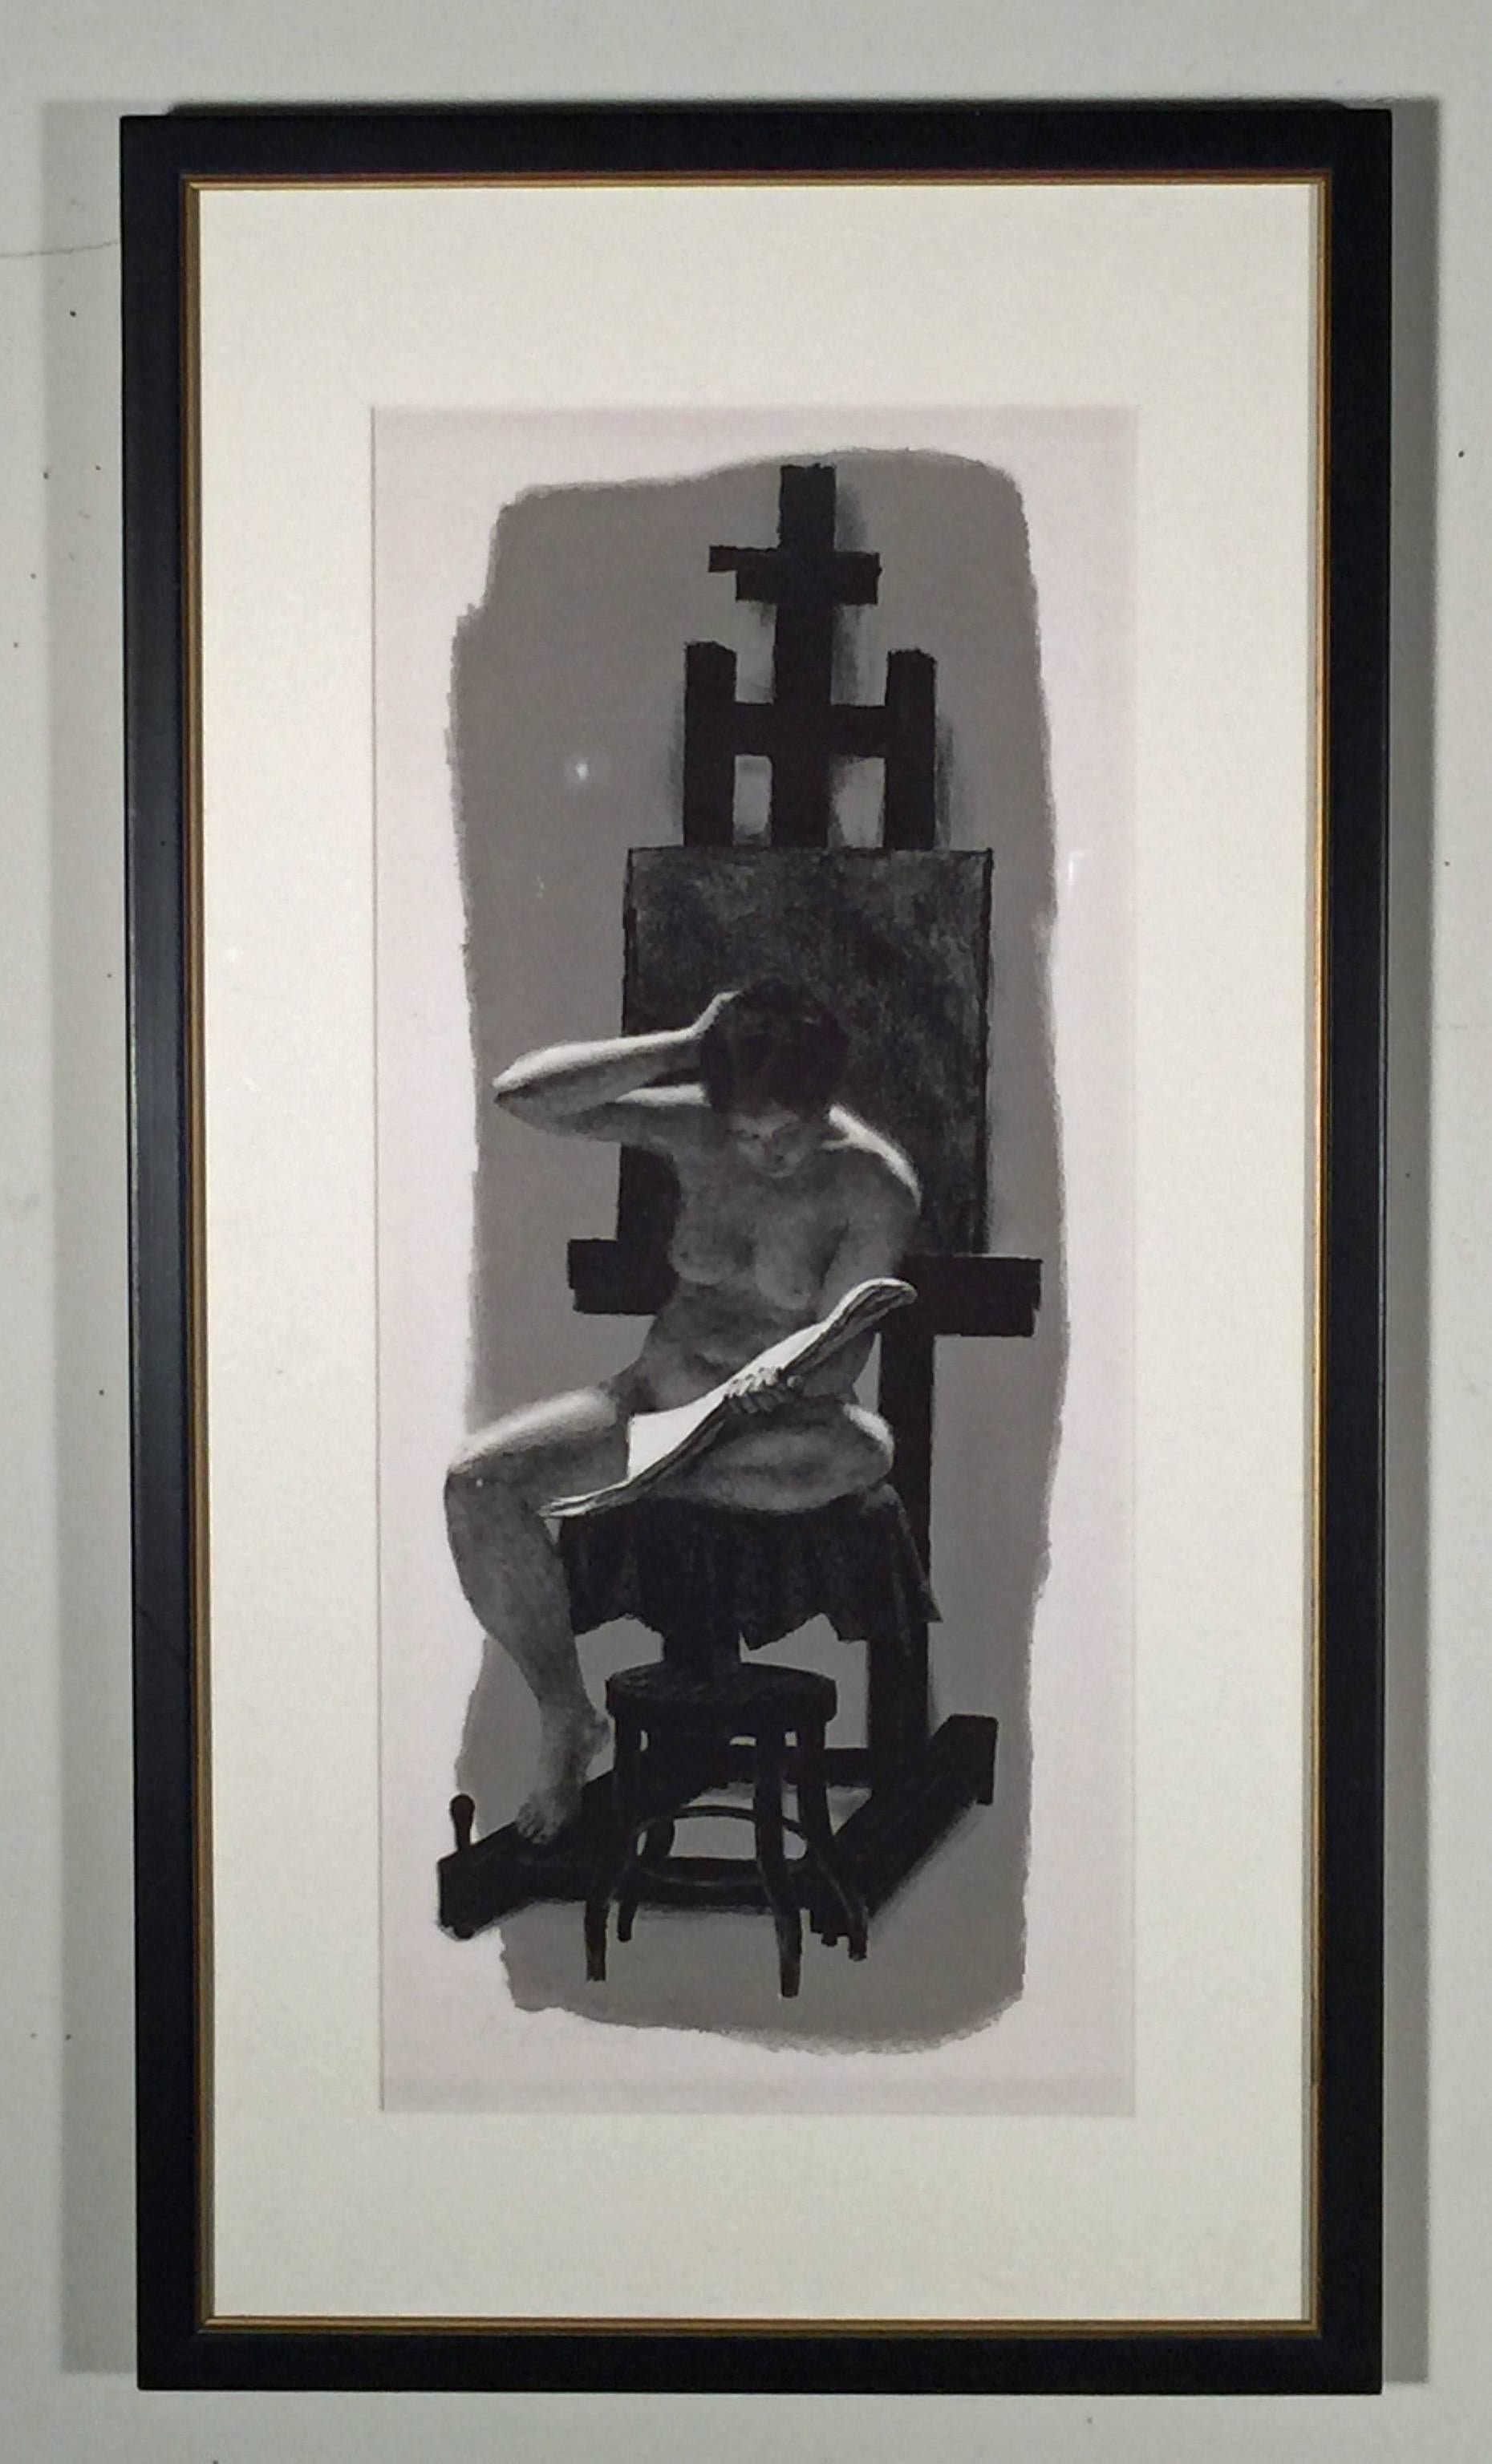 MODEL AND EASEL - Print by Joseph Hirsch